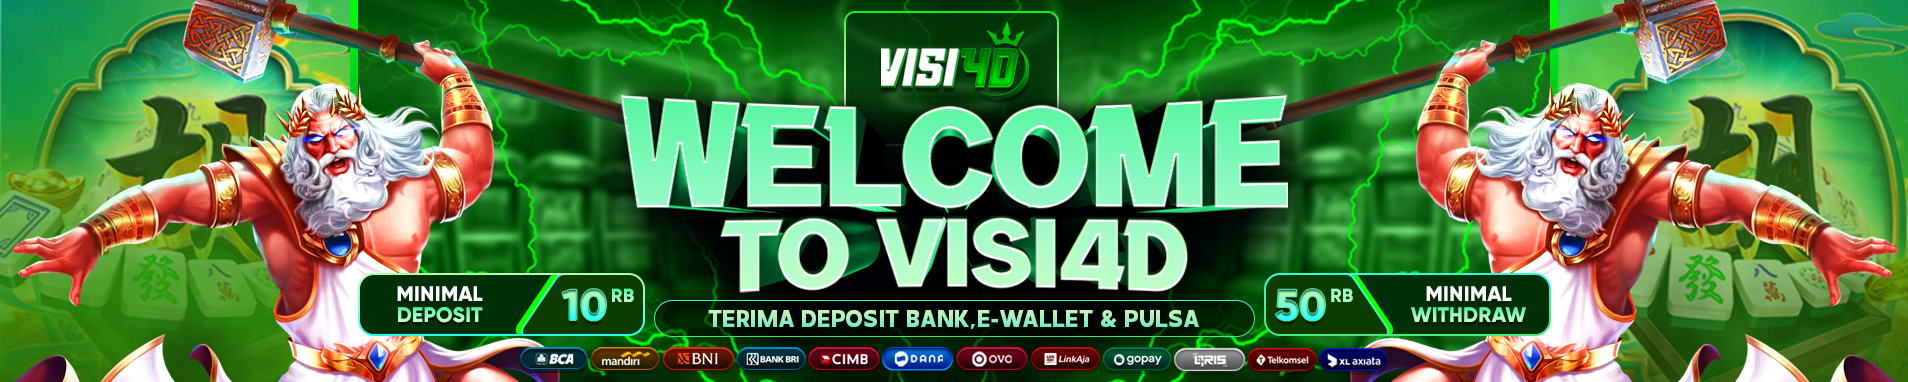 WELCOME TO VISI4D